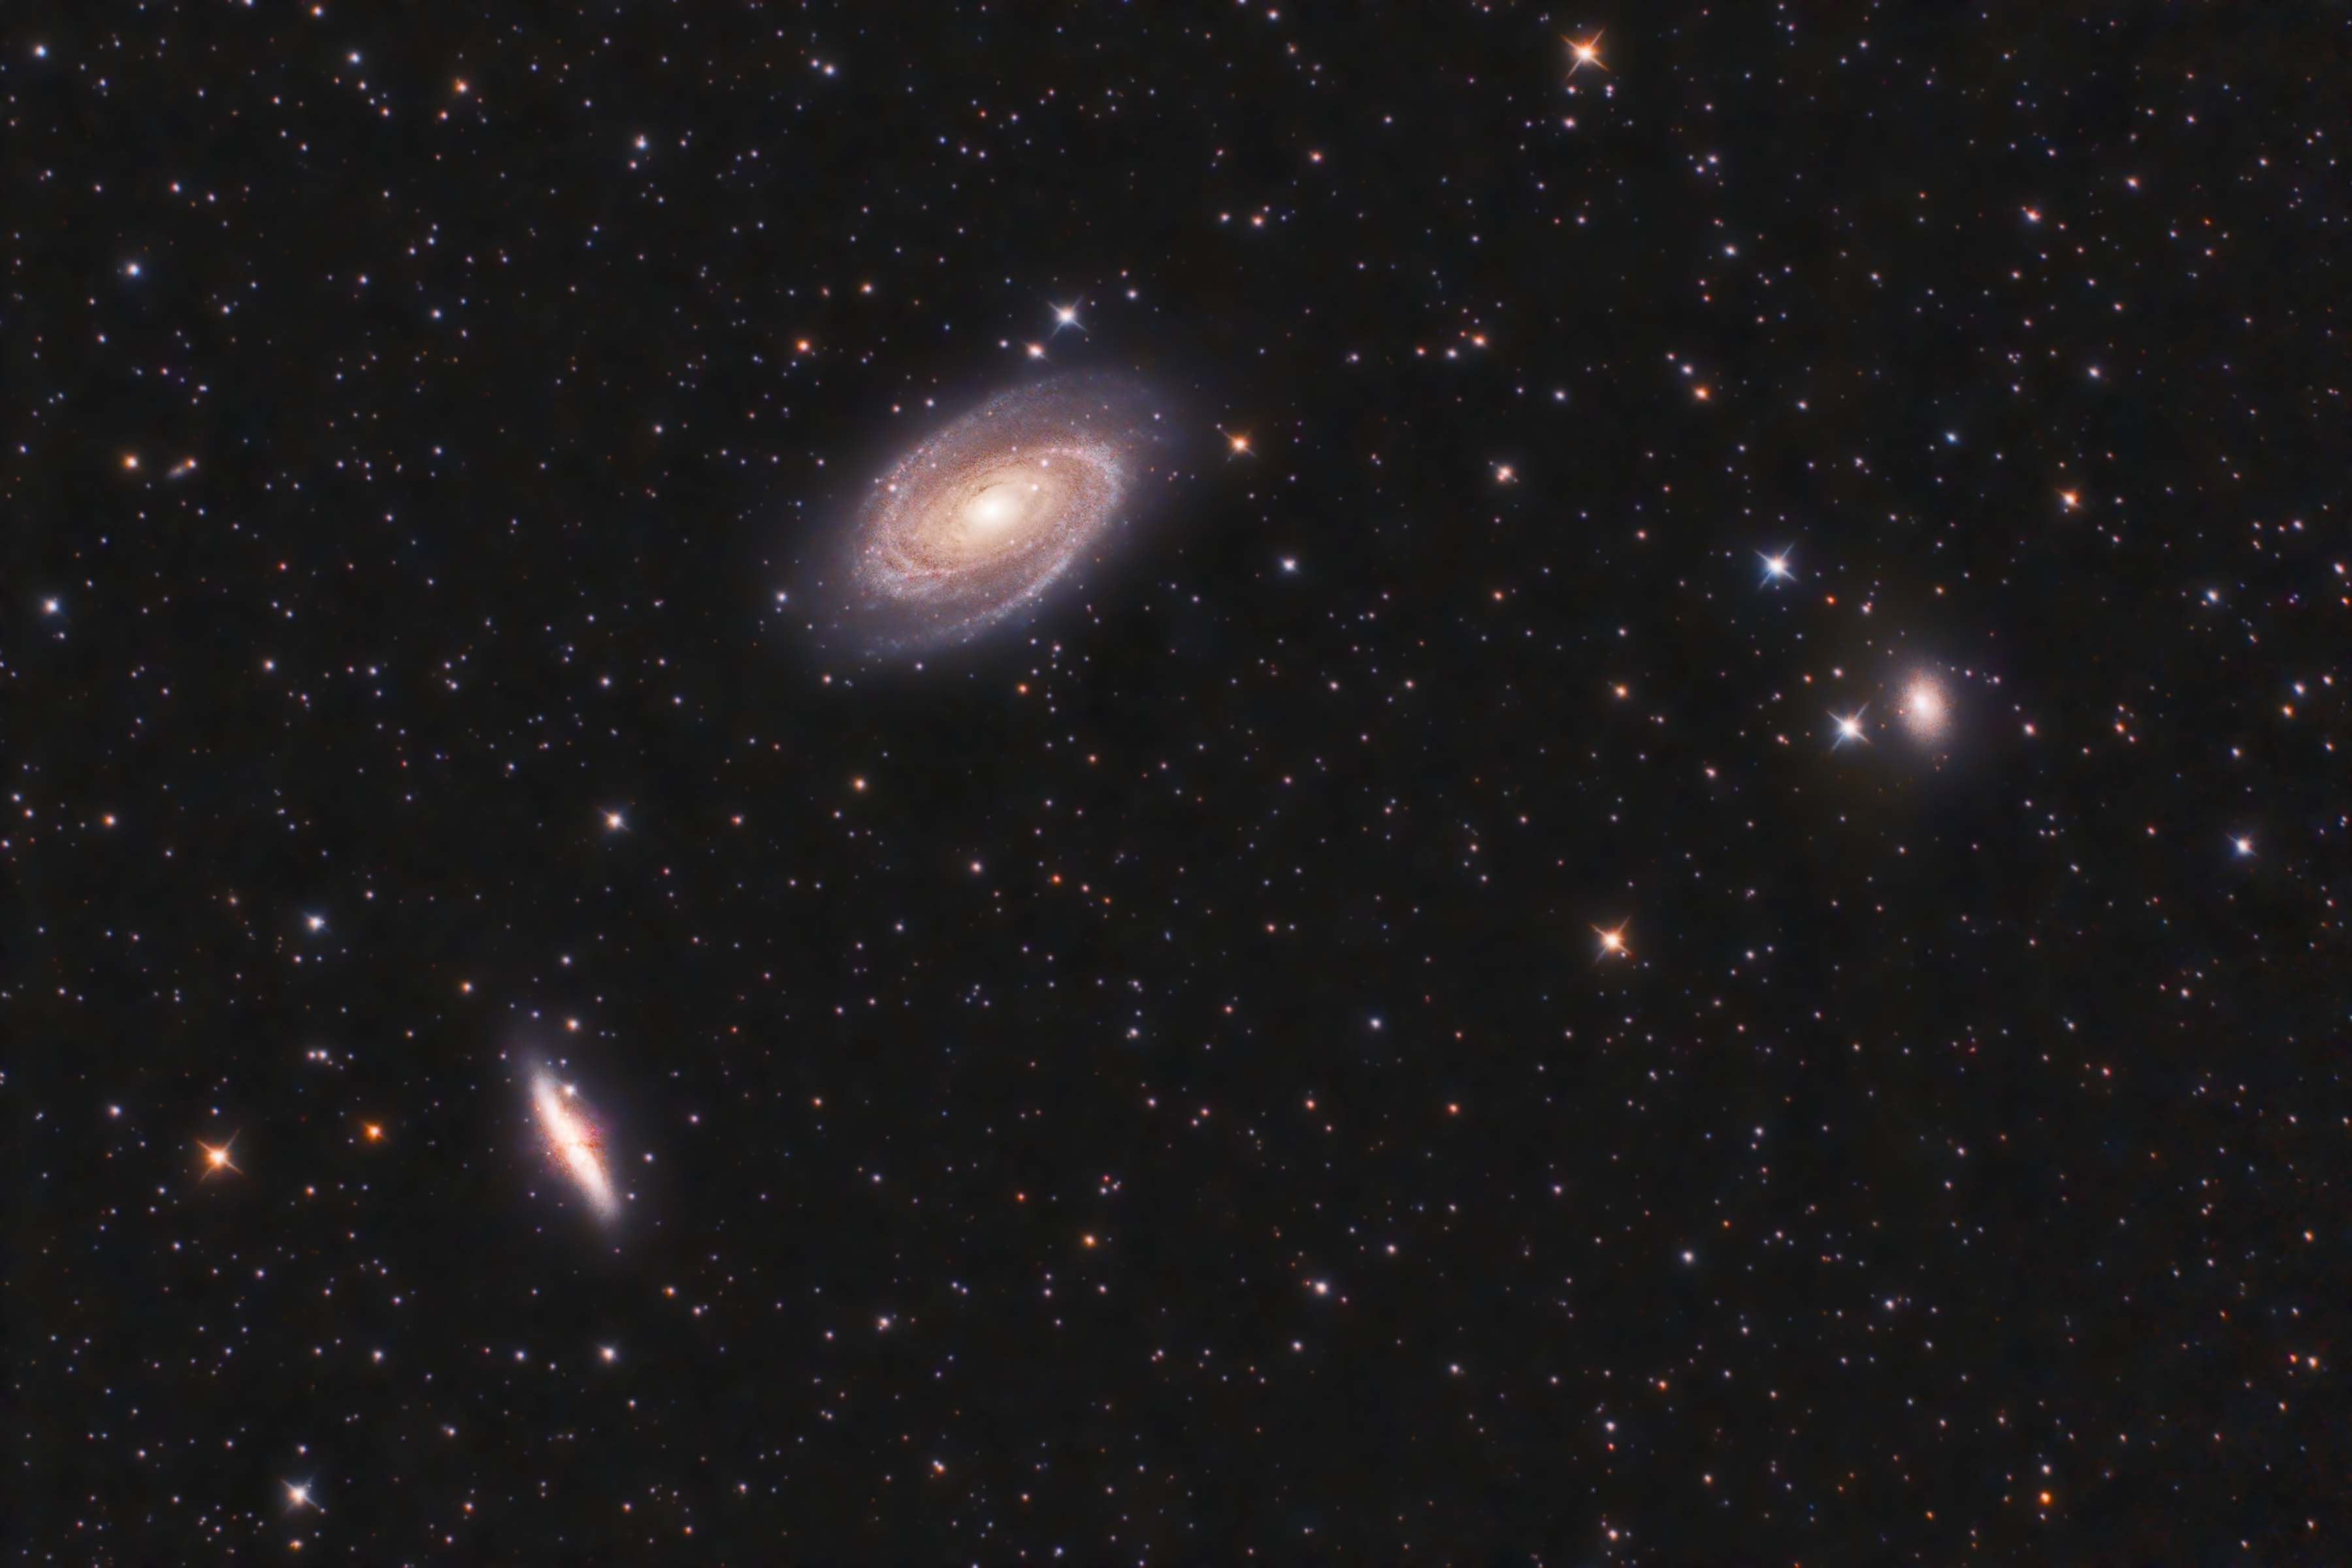 Bode's and Cigar Galaxies by Bill McSorley, Leeds, UK.